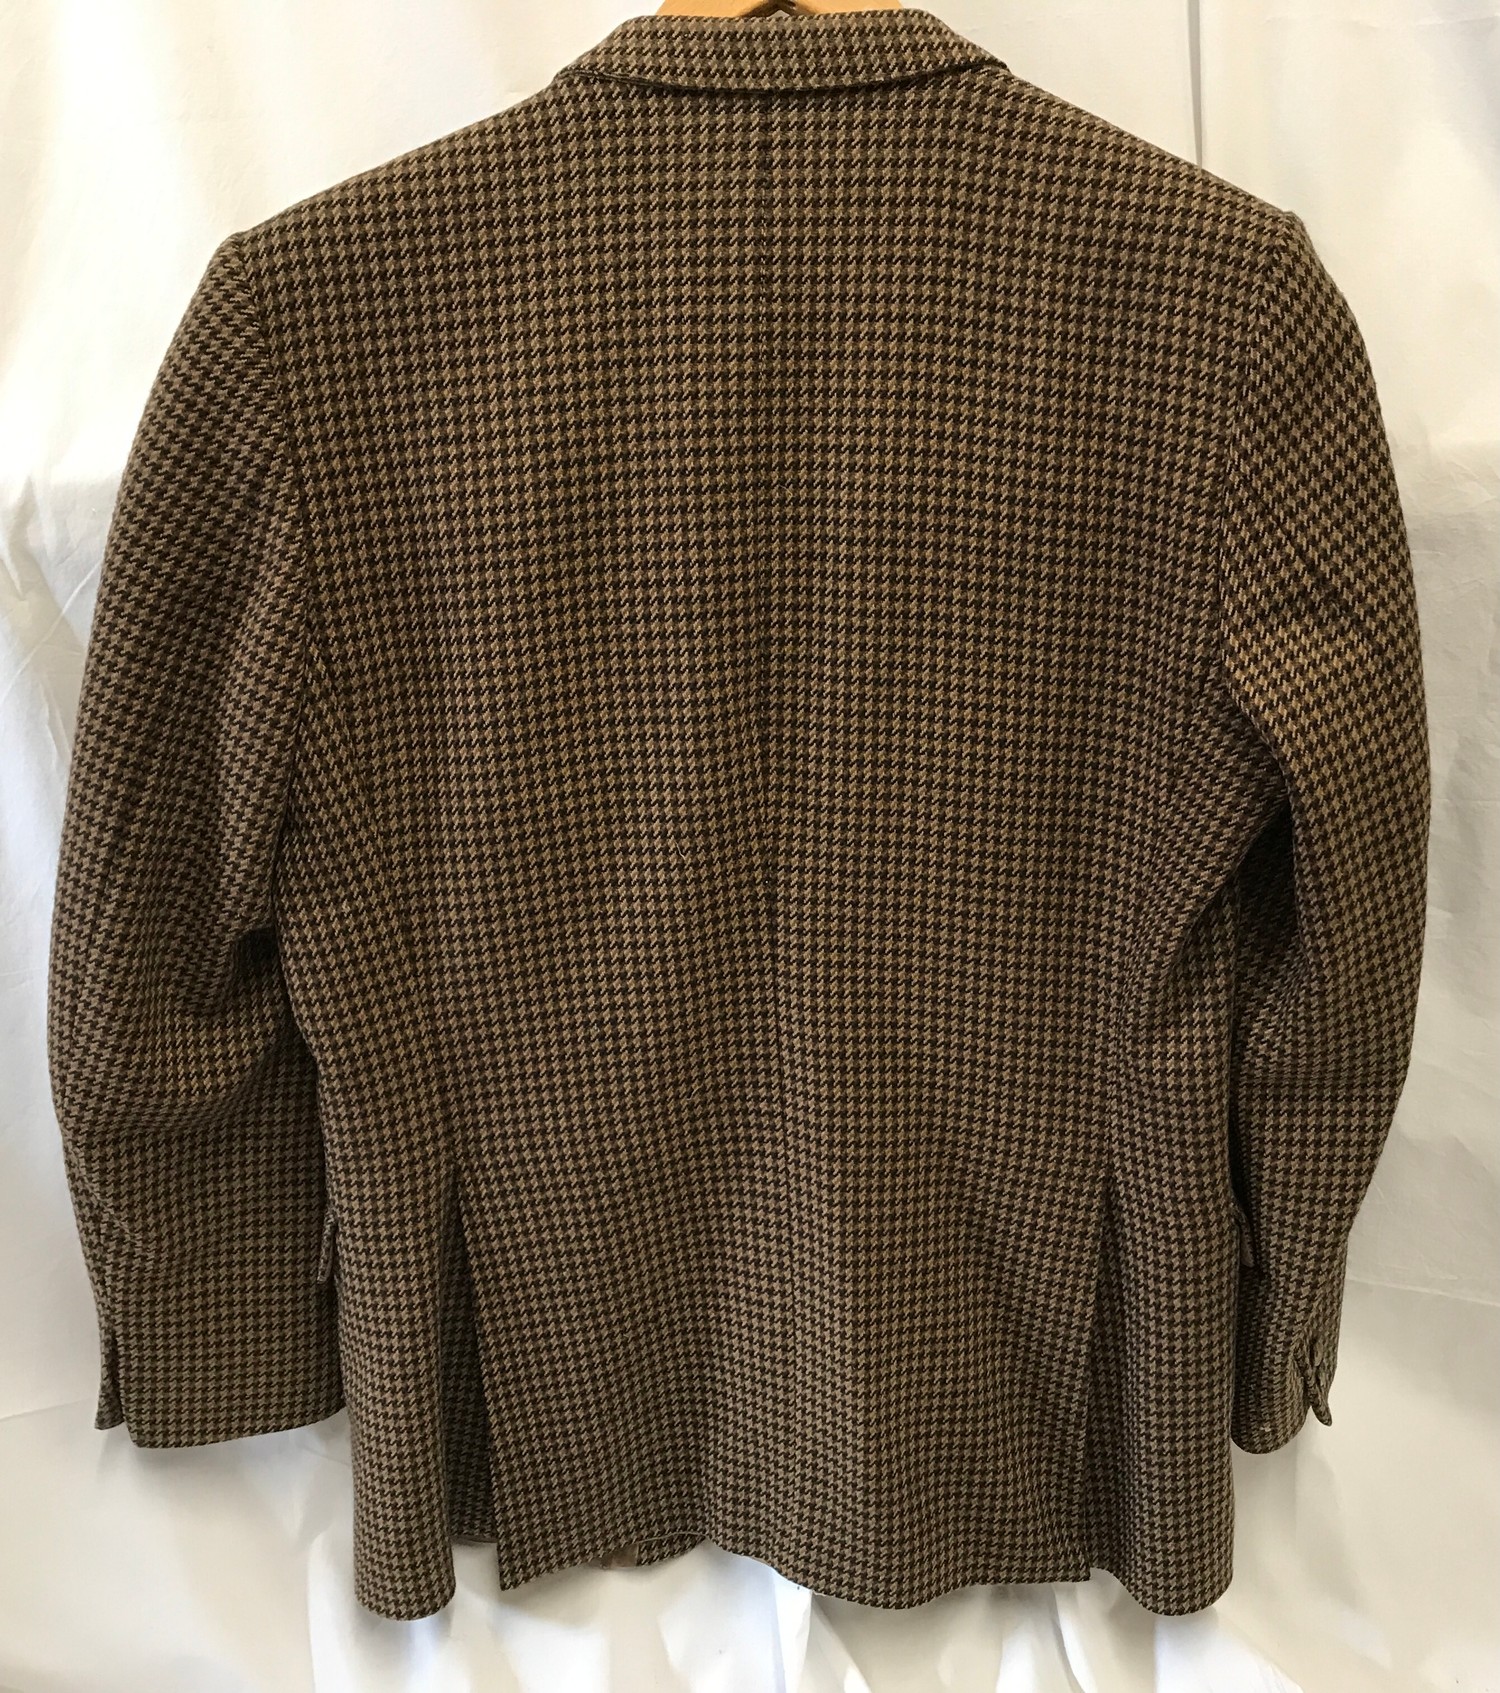 Christian Dior Gentleman's Jacket, dog tooth pattern pure wool, viscose lined size 40 regular. - Image 6 of 6